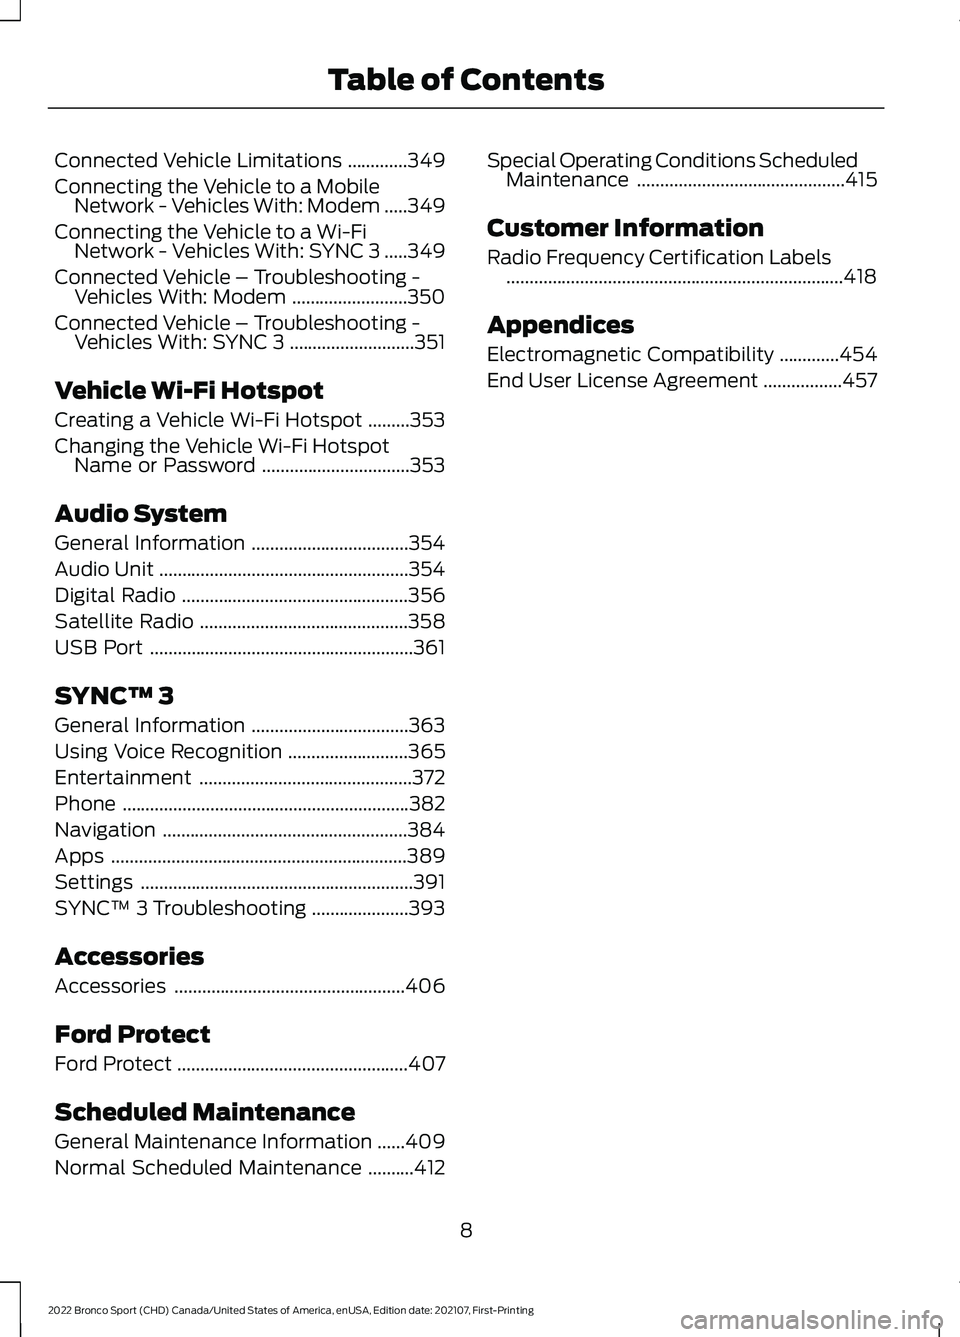 FORD BRONCO SPORT 2022  Owners Manual Connected Vehicle Limitations
.............349
Connecting the Vehicle to a Mobile Network - Vehicles With: Modem .....
349
Connecting the Vehicle to a Wi-Fi Network - Vehicles With: SYNC 3 .....
349
C